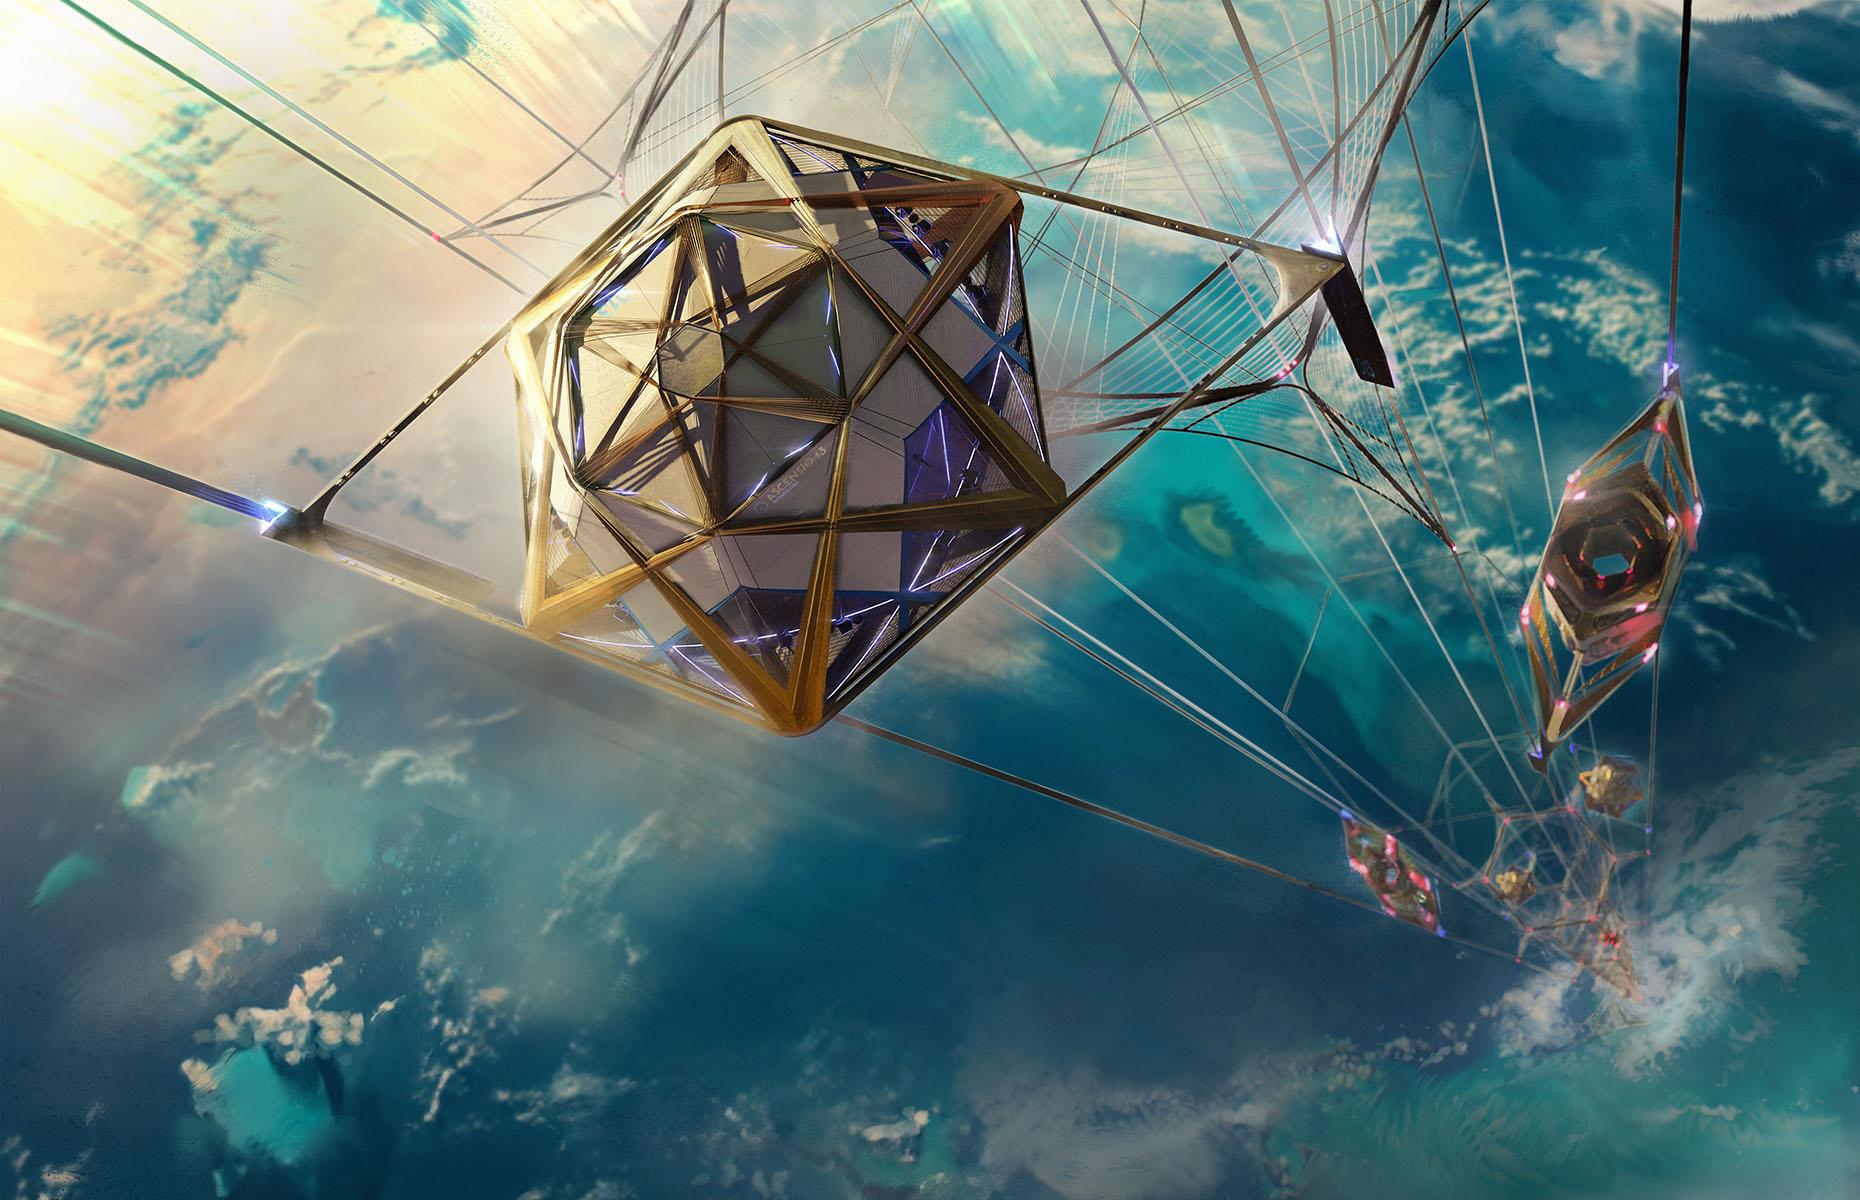 <p>British architect Jordan William Hughes won the 2023 Jacques Rougerie International prize for this incredible design for an elevator that could seriously simplify space travel. Using existing research by engineers and physicists, Hughes' design would create a tether between an ocean-based 'spaceport' and a captured asteroid in geostationary orbit, according to <em>Dezeen</em>. People and cargo could then shuttle between the two in small drones as an alternative to rockets, which Hughes believes are inefficient and environmentally damaging.</p>